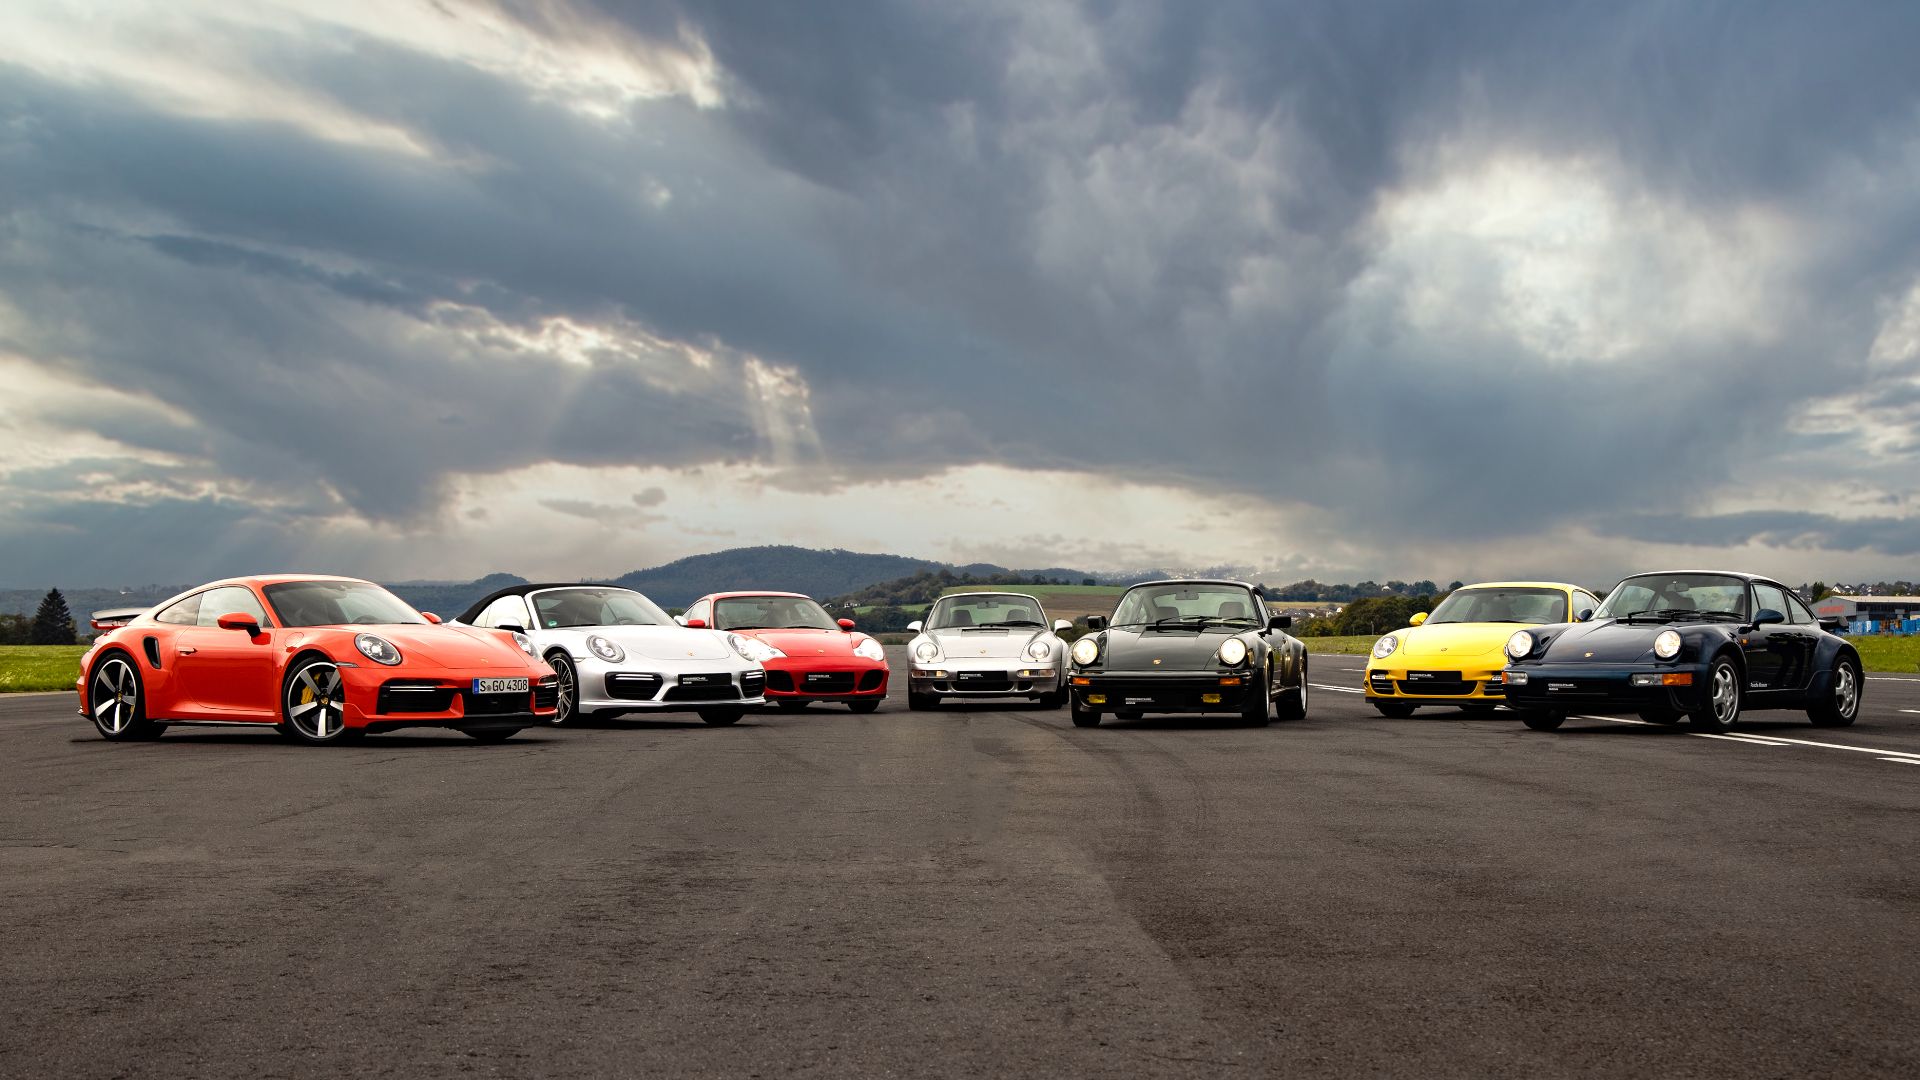 A group shot of several Porsche 911 Turbo generations